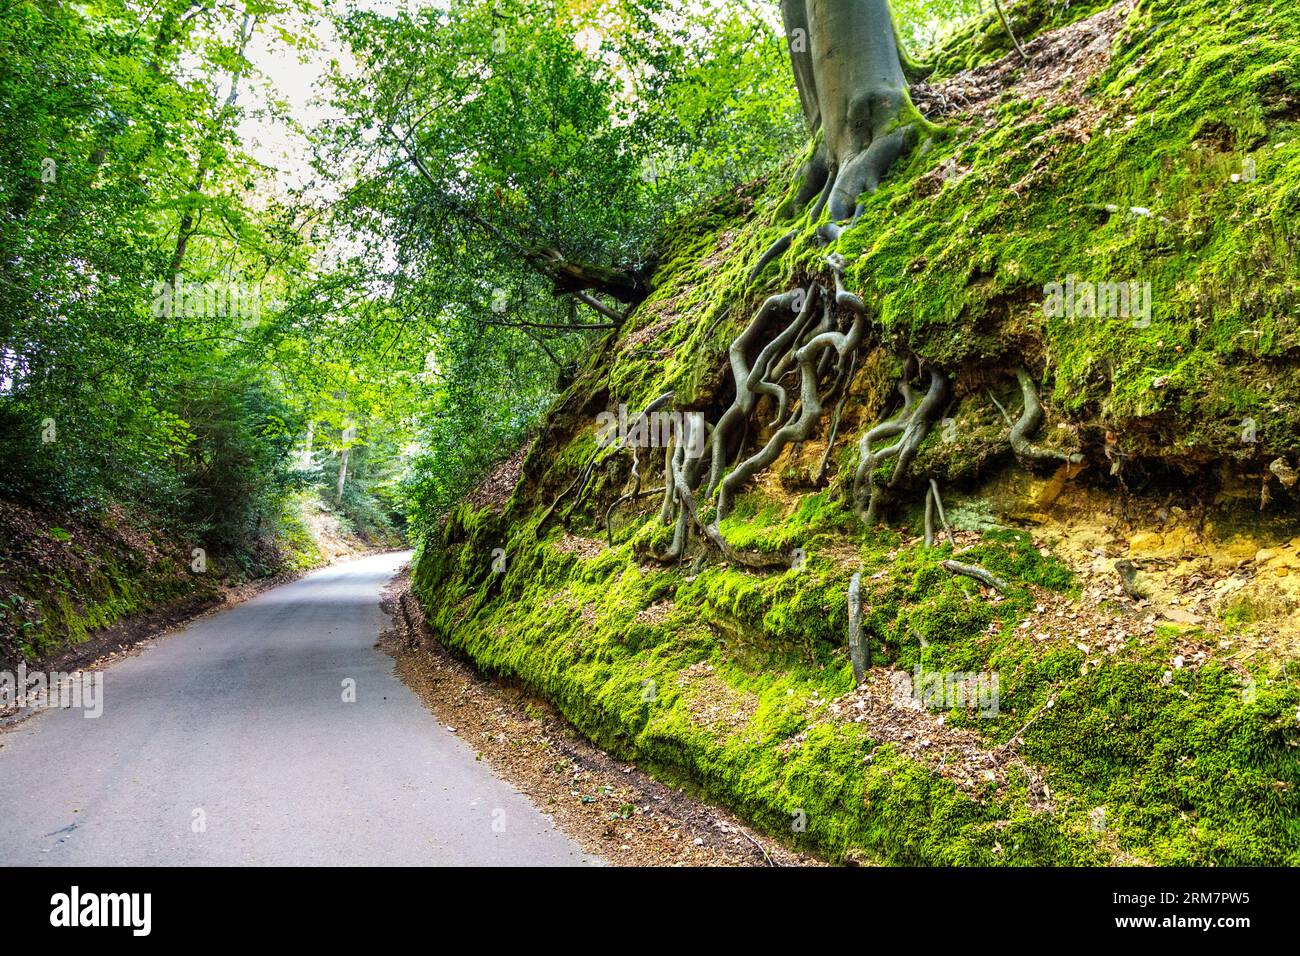 Sunken road with tree roots showing on the side in Surrey hills near Farnham, England Stock Photo